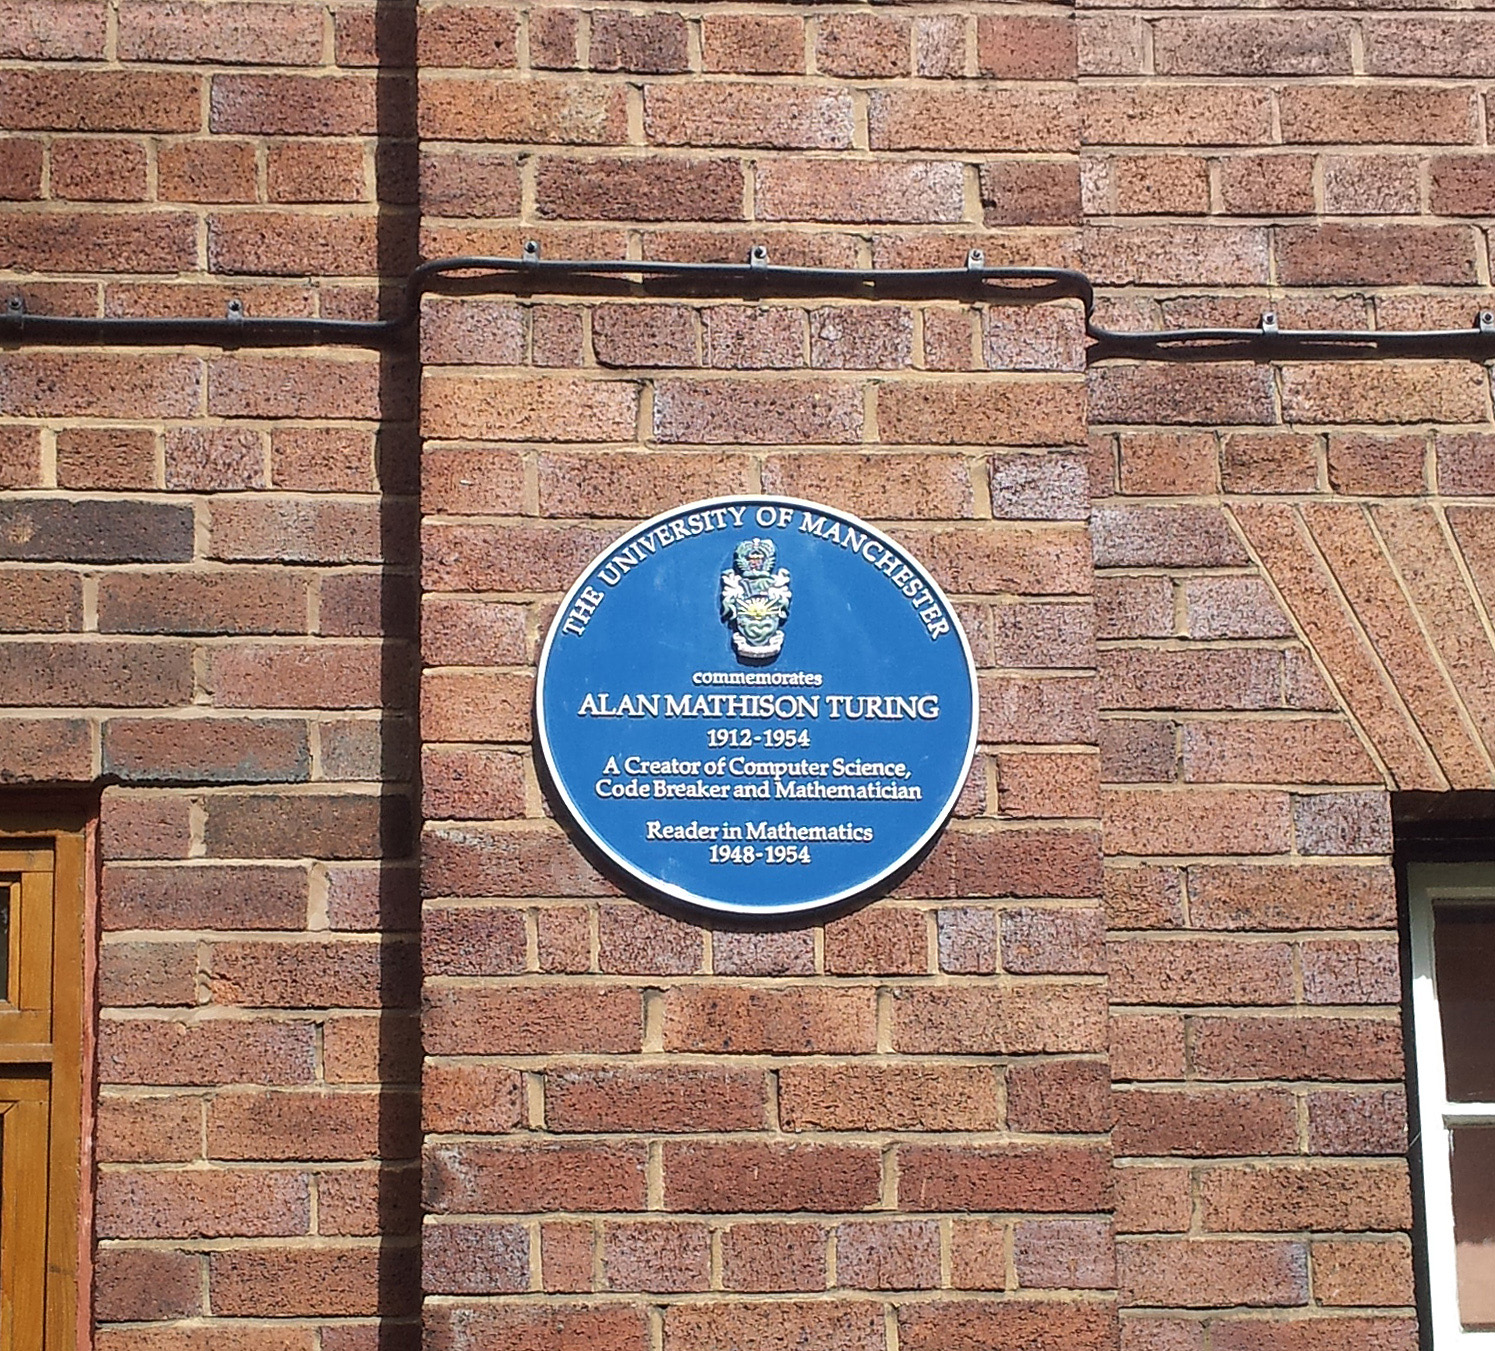 Alan Turing plaque at University of Manchester